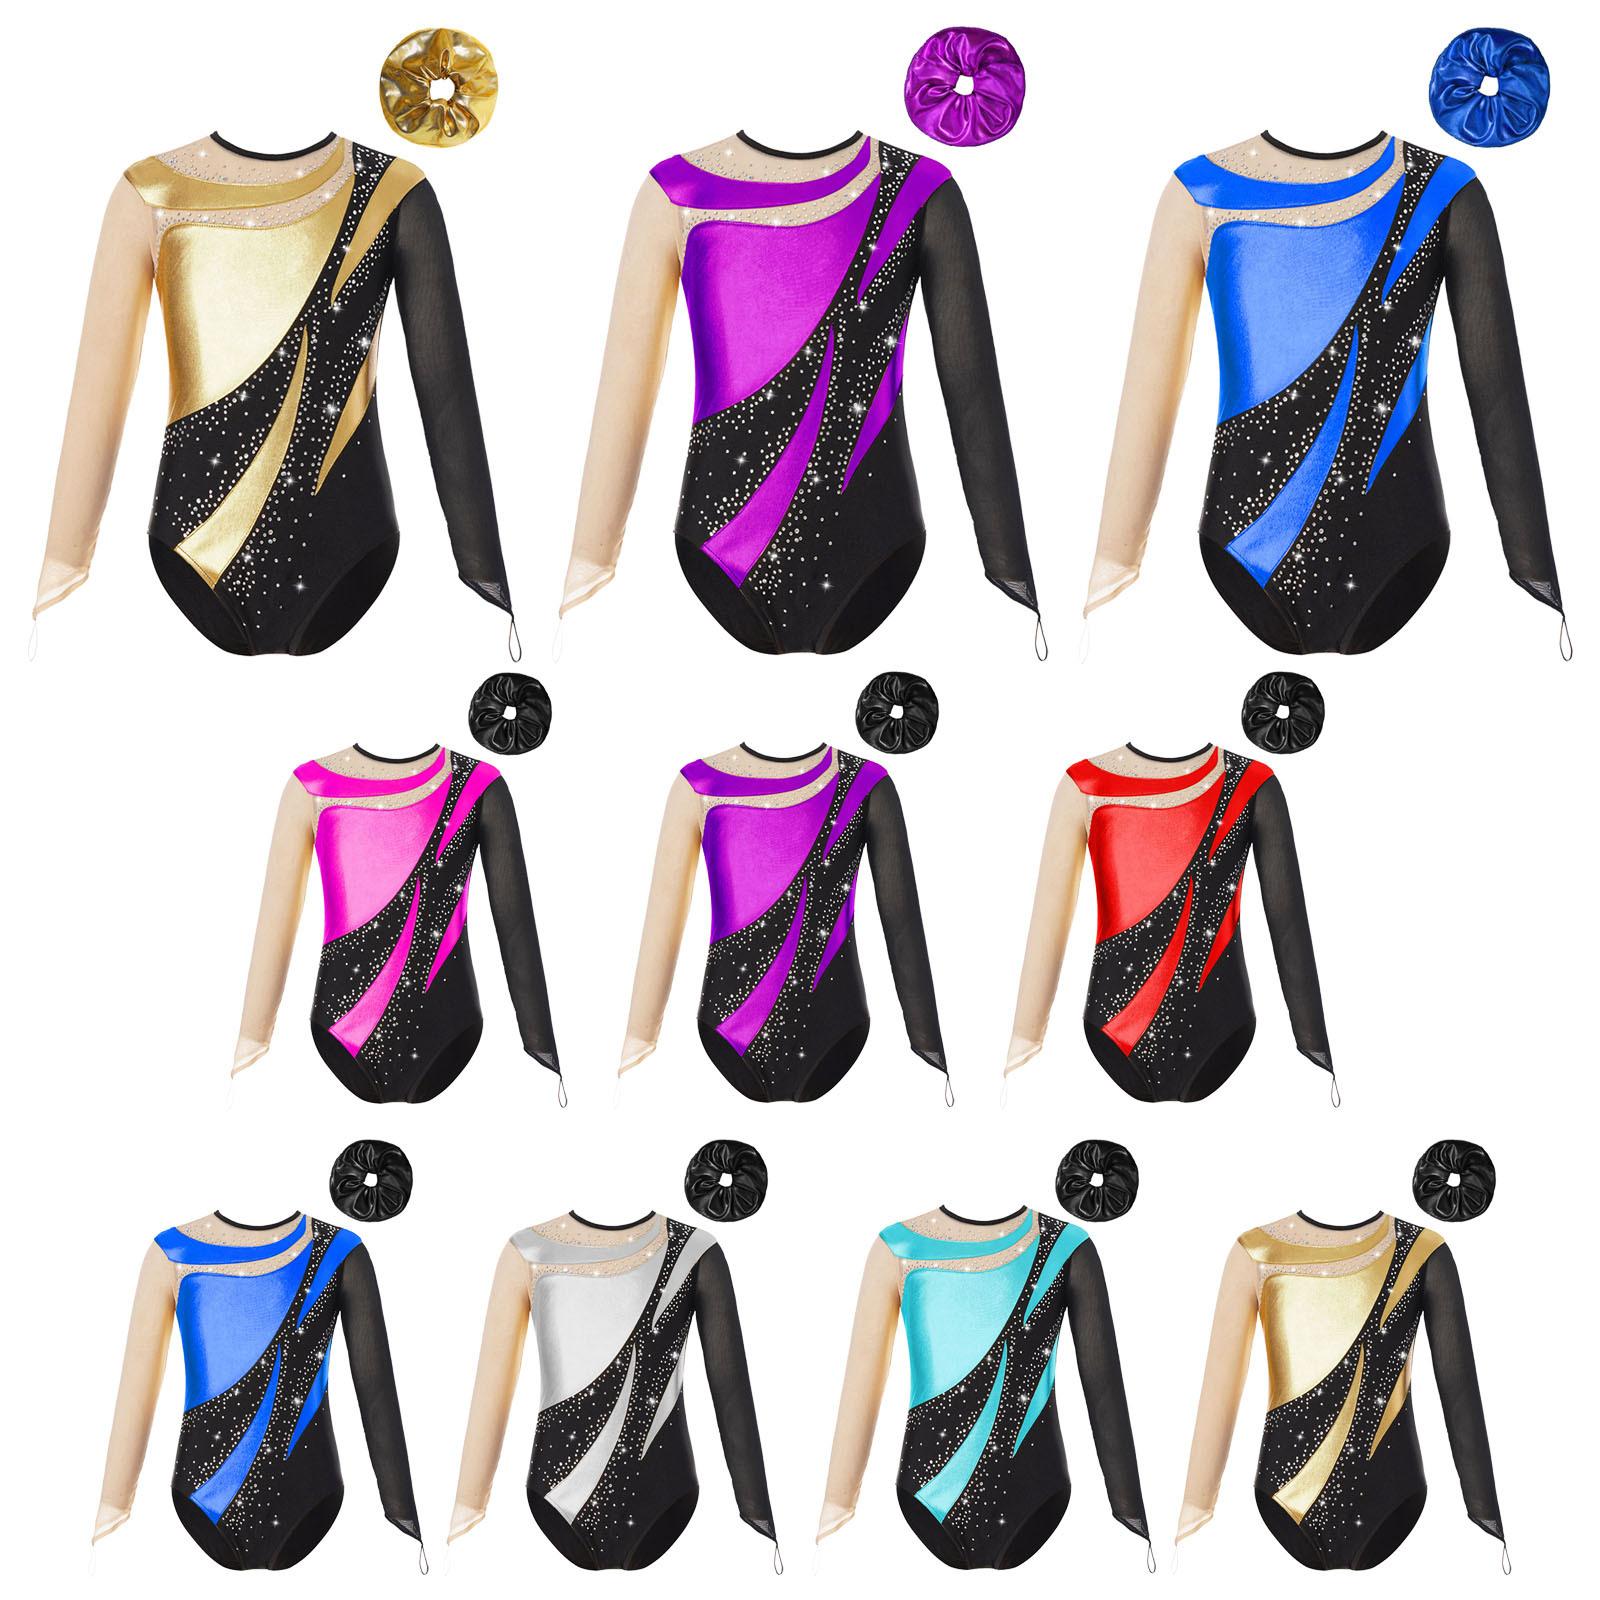 Sxiwei Kids Girls Gymnastic Performance Outfit Mesh Long Sleeve Keyhole Back Leotard Patchwork Bodysuit with Hair Band